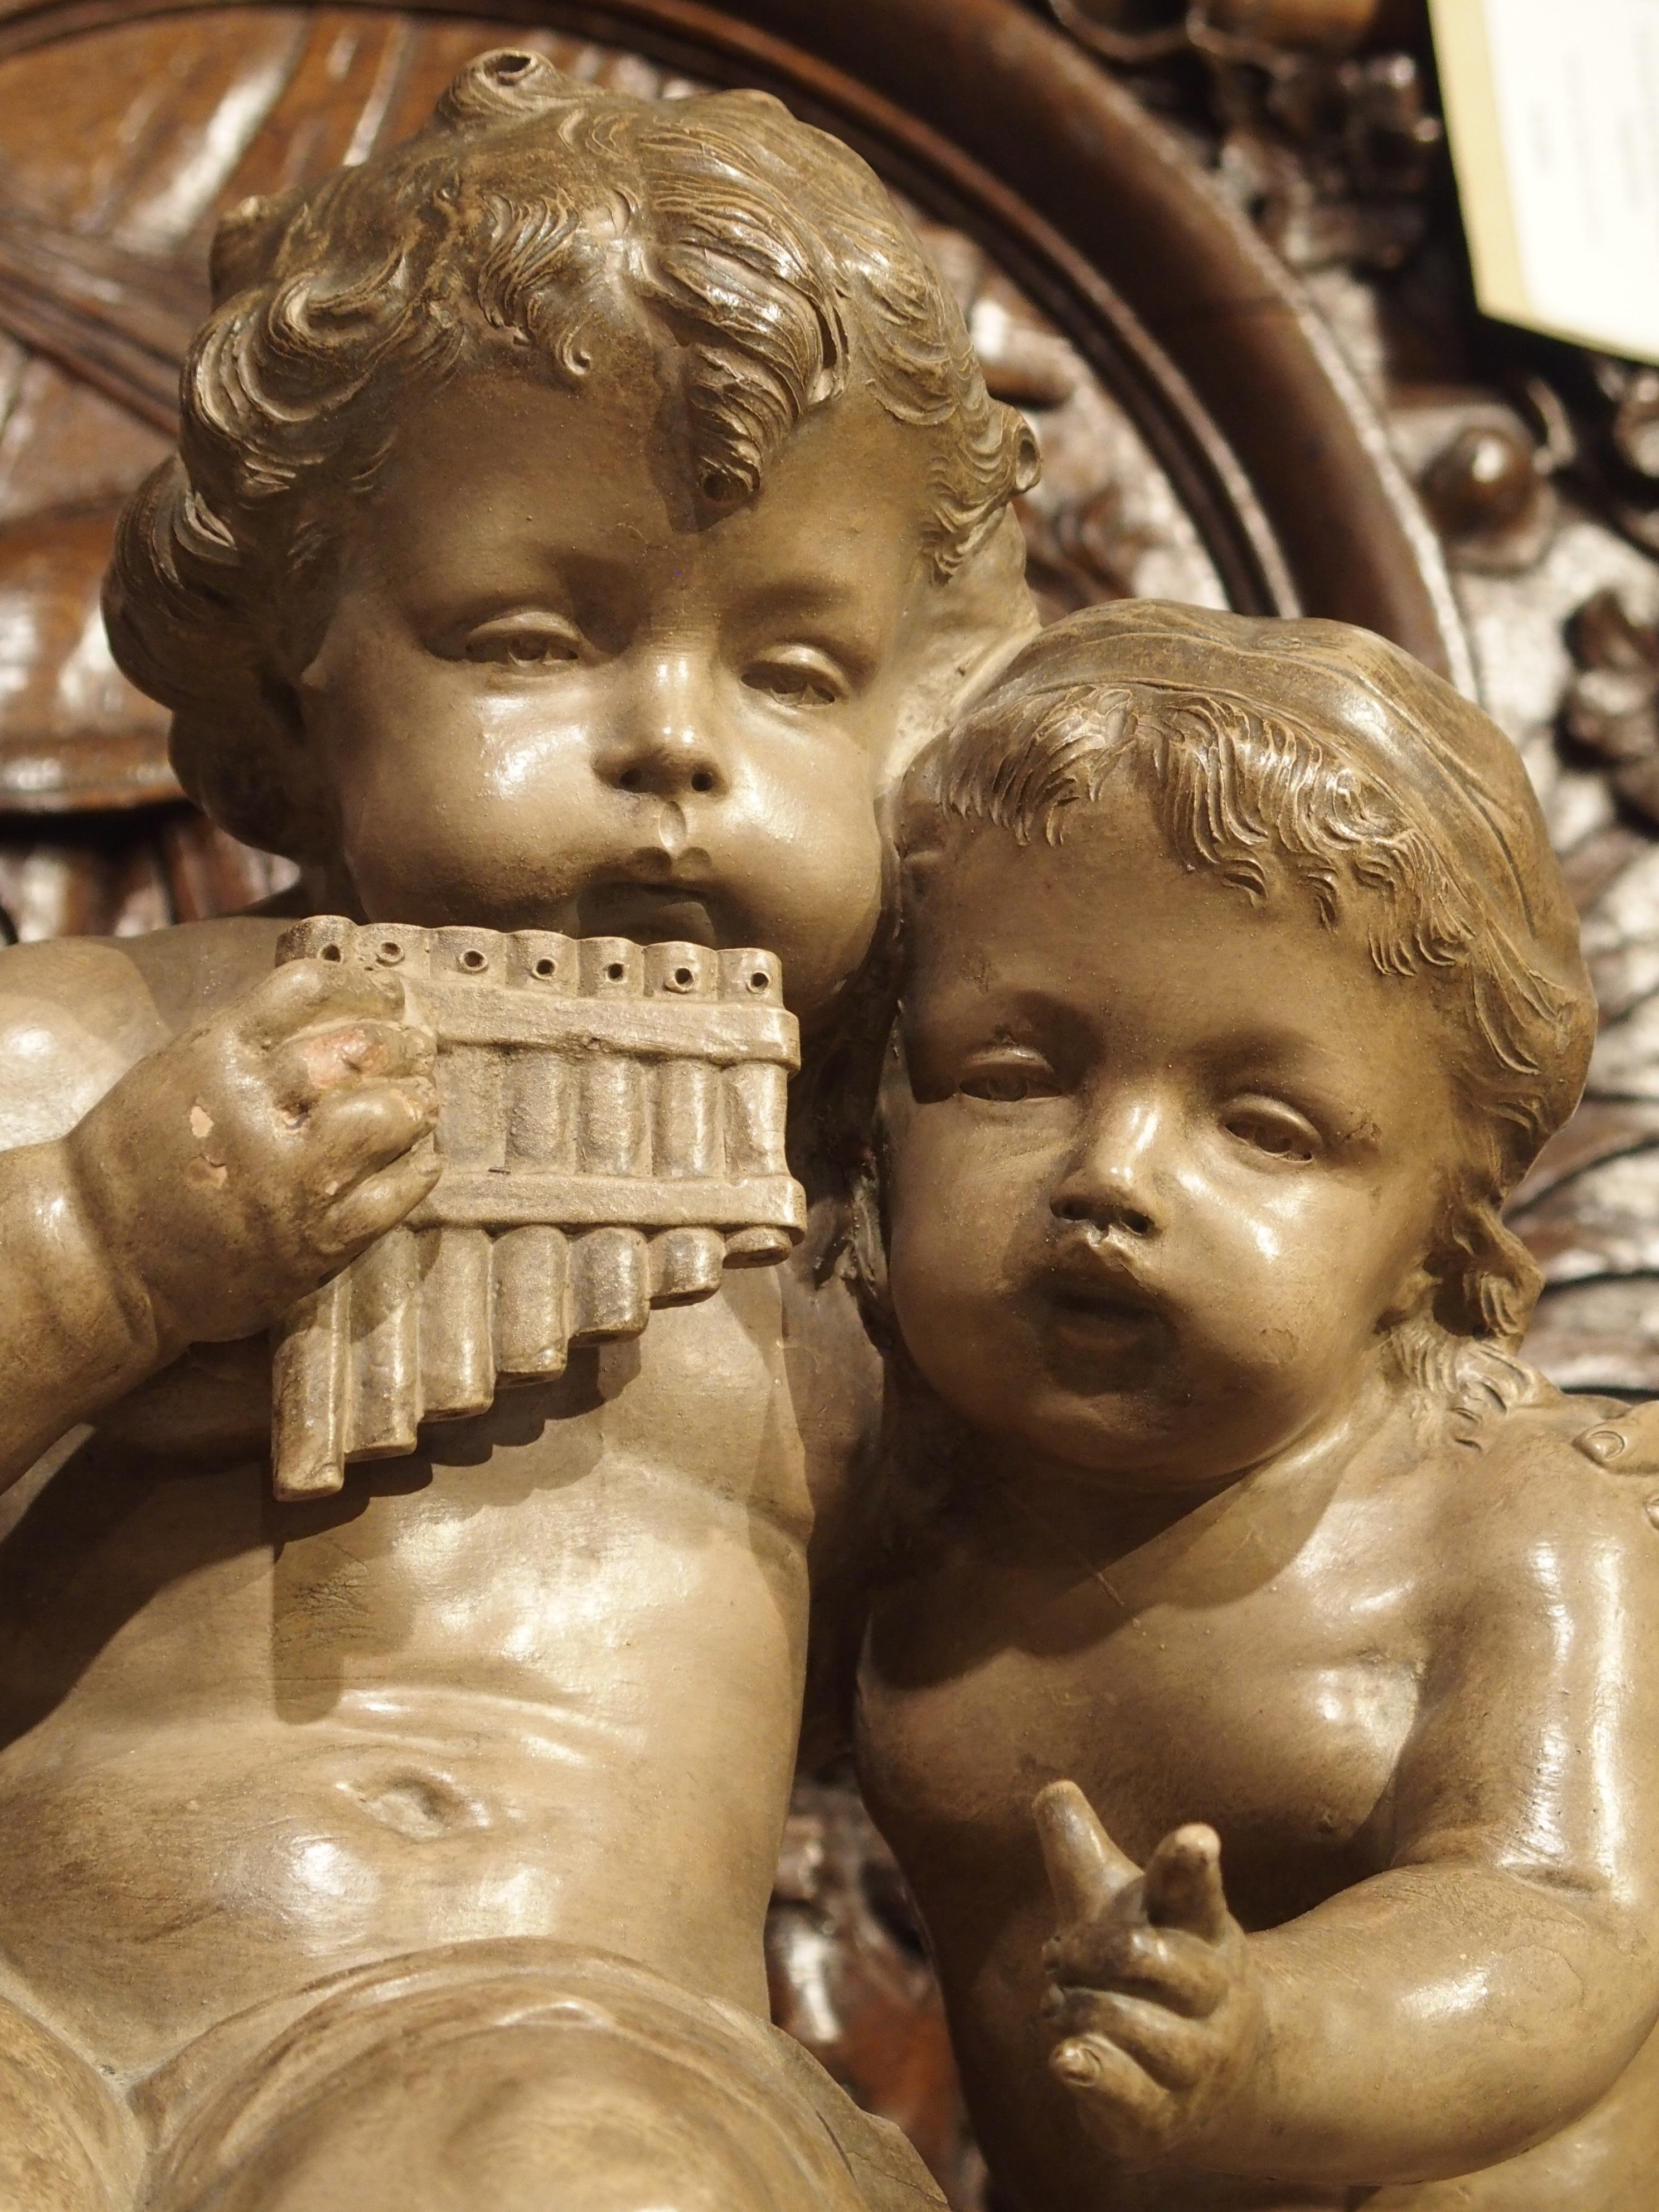 Carved Antique Terracotta of a Boy and Girl, France, Early 1900s